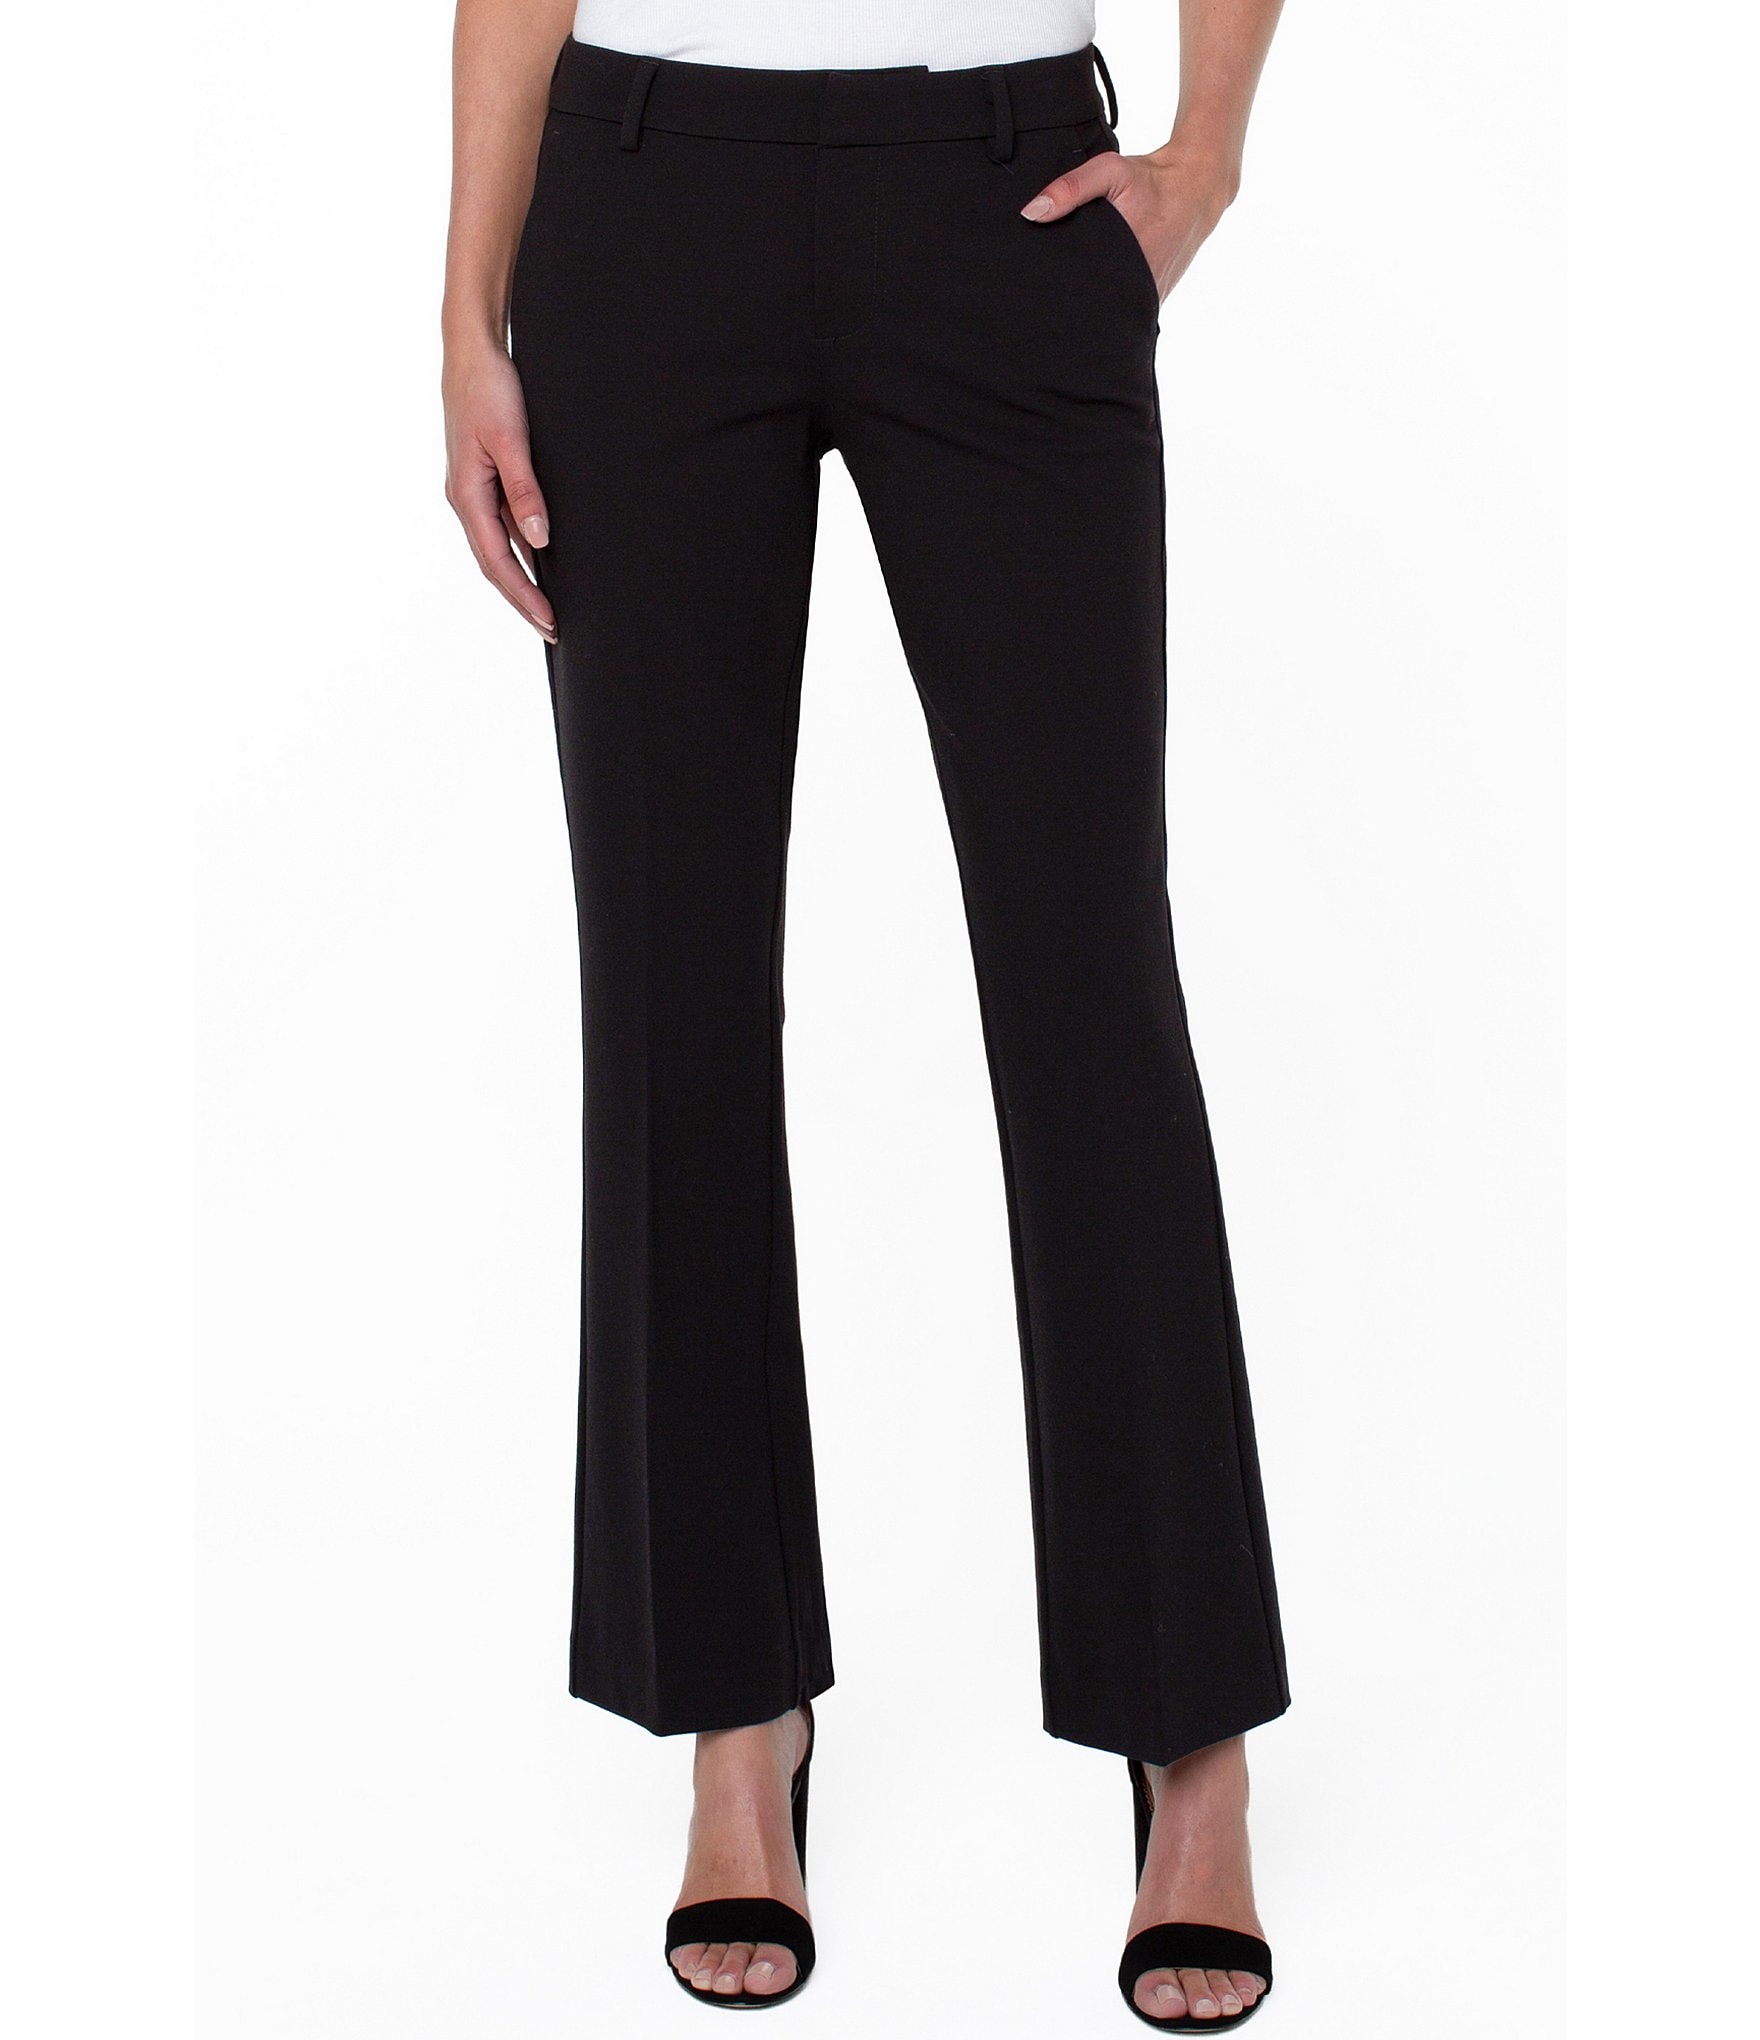 Wednesday's Workwear Report: Mid-Rise Pull-On Flat-Front Pants -  Corporette.com